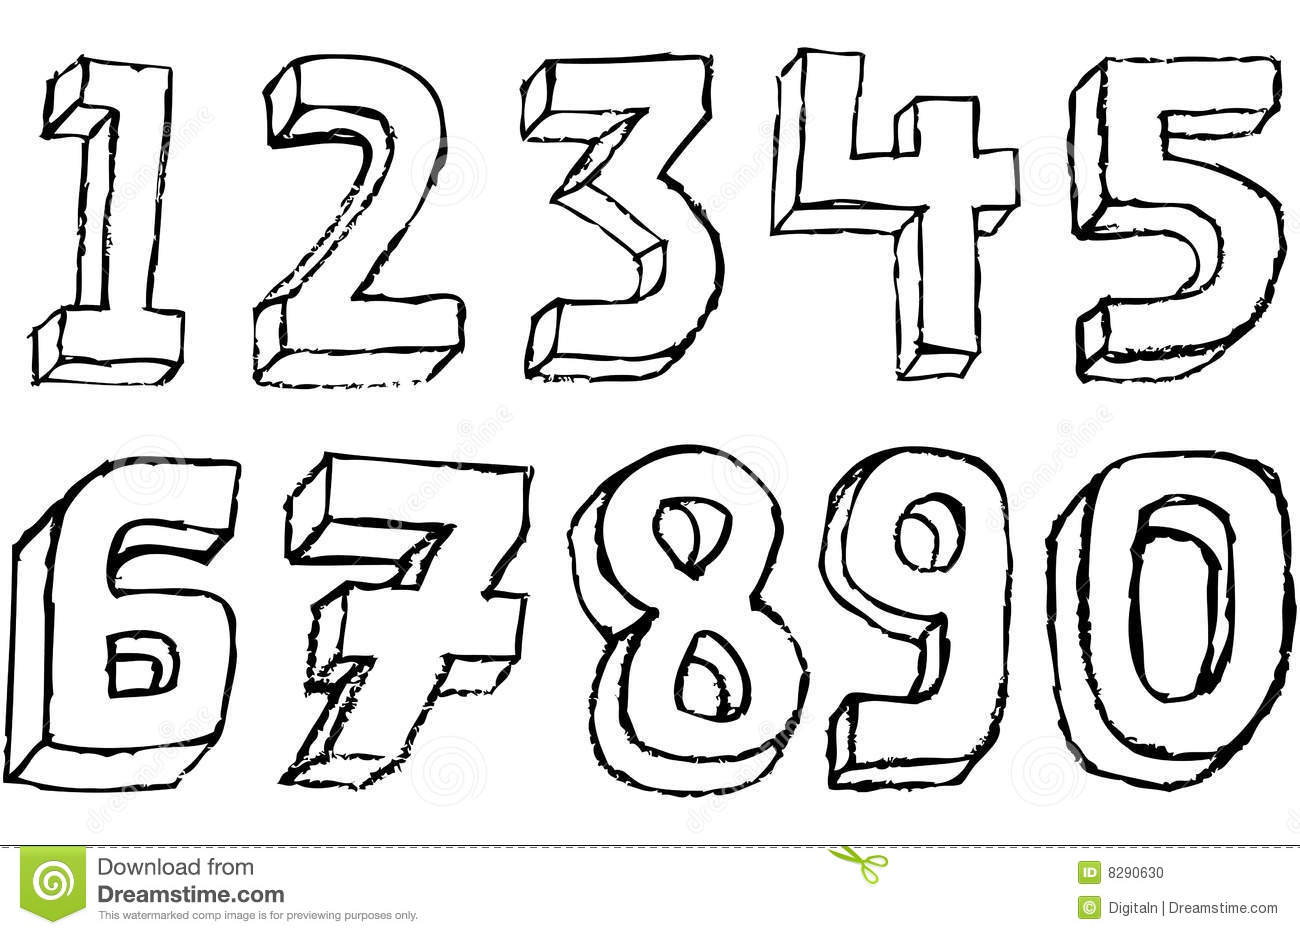 Grunge 3d Numbers In Black And White Stock Photo   Image  8290630